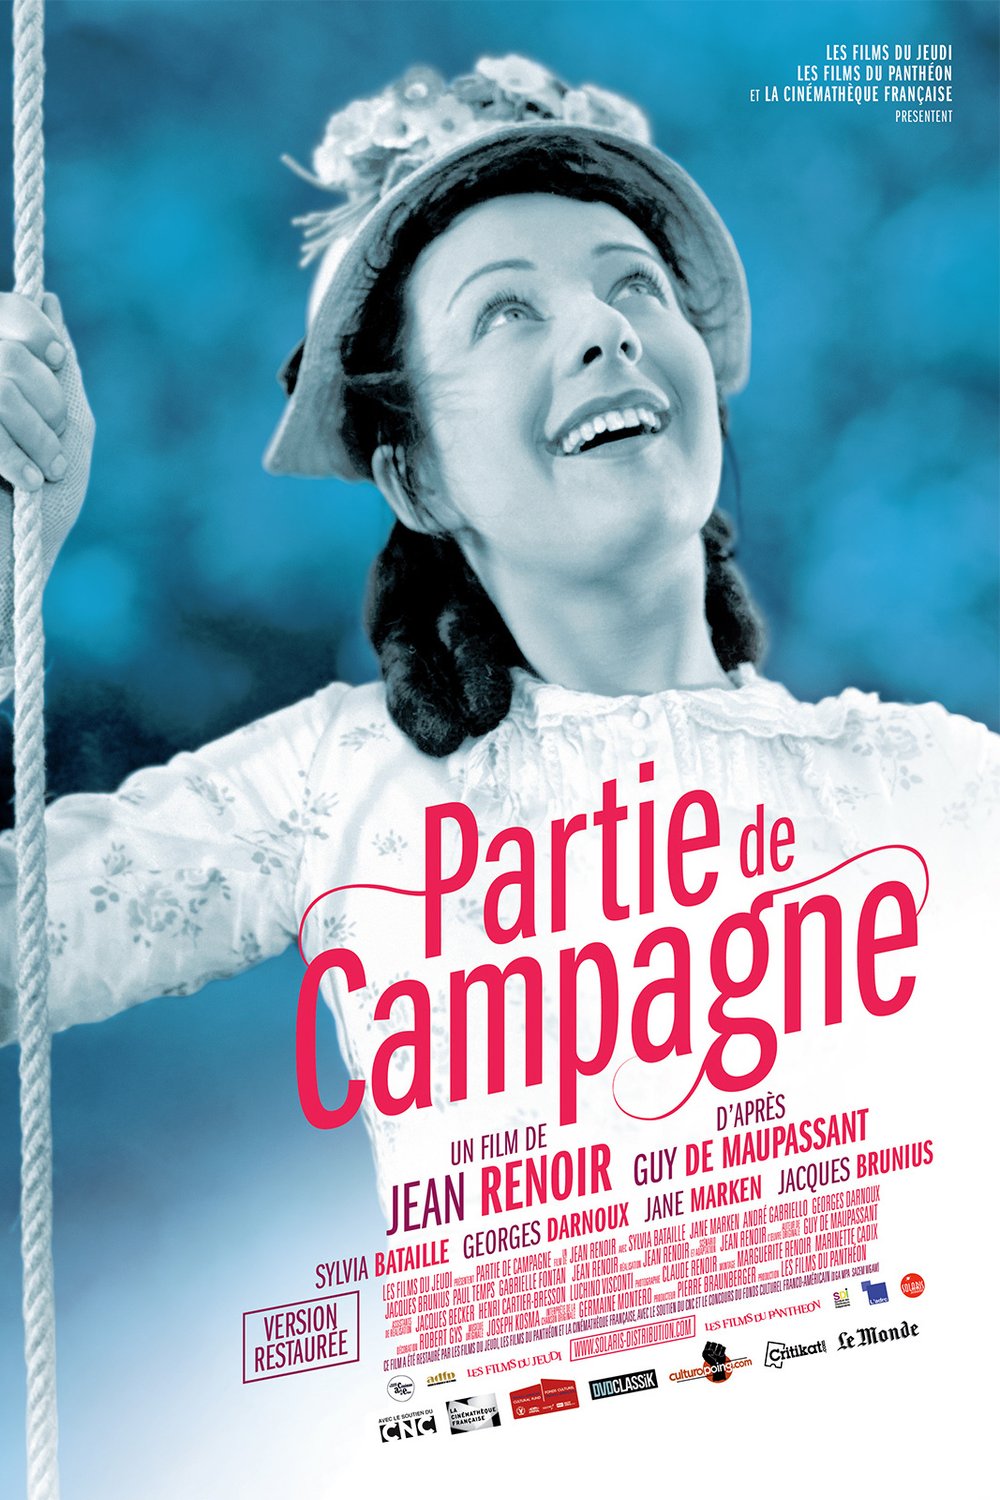 Poster of the movie Partie de campagne